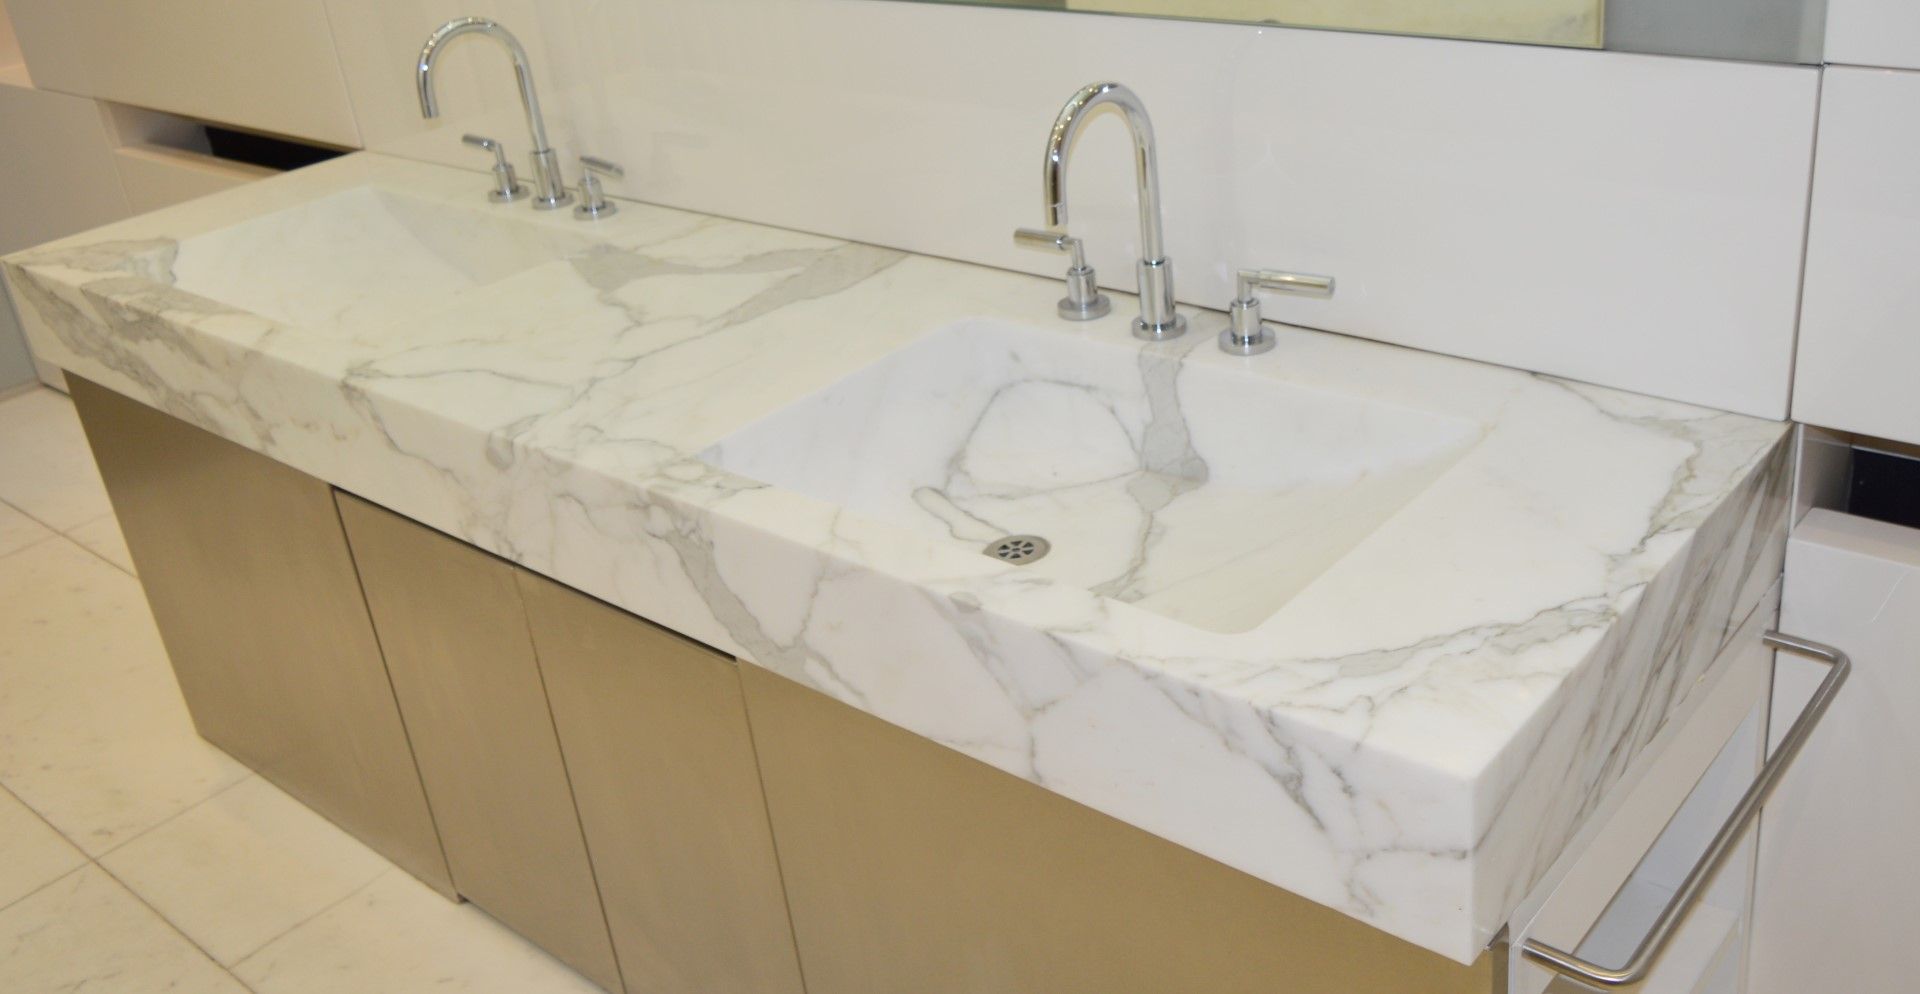 1 x Bespoke His & Hers Marble Bathroom Vanity Unit - Exquisite 7ft Twin Marble Sink Basin With Two - Image 5 of 25